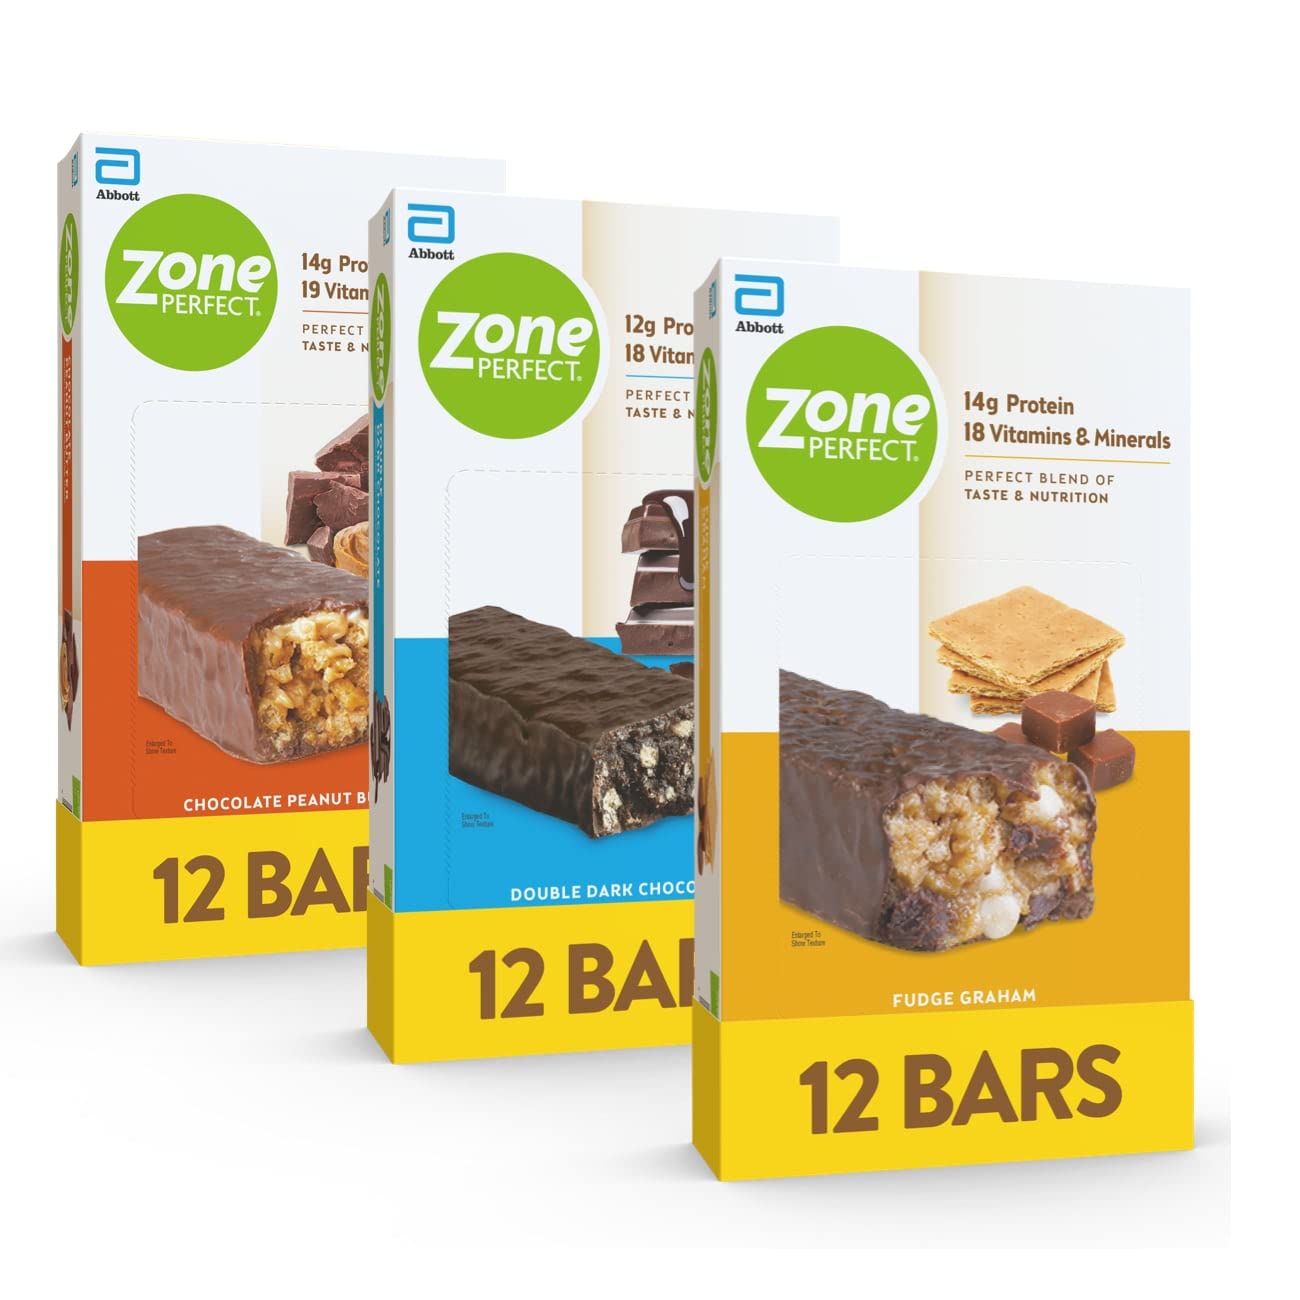 ZonePerfect Protein Bars, 12-14g Protein, 18-19 Vitamins & Minerals, Nutritious Snack Bar, Double Dark Chocolate, Fudge Graham, Chocolate Peanut Butter, 36 Bars